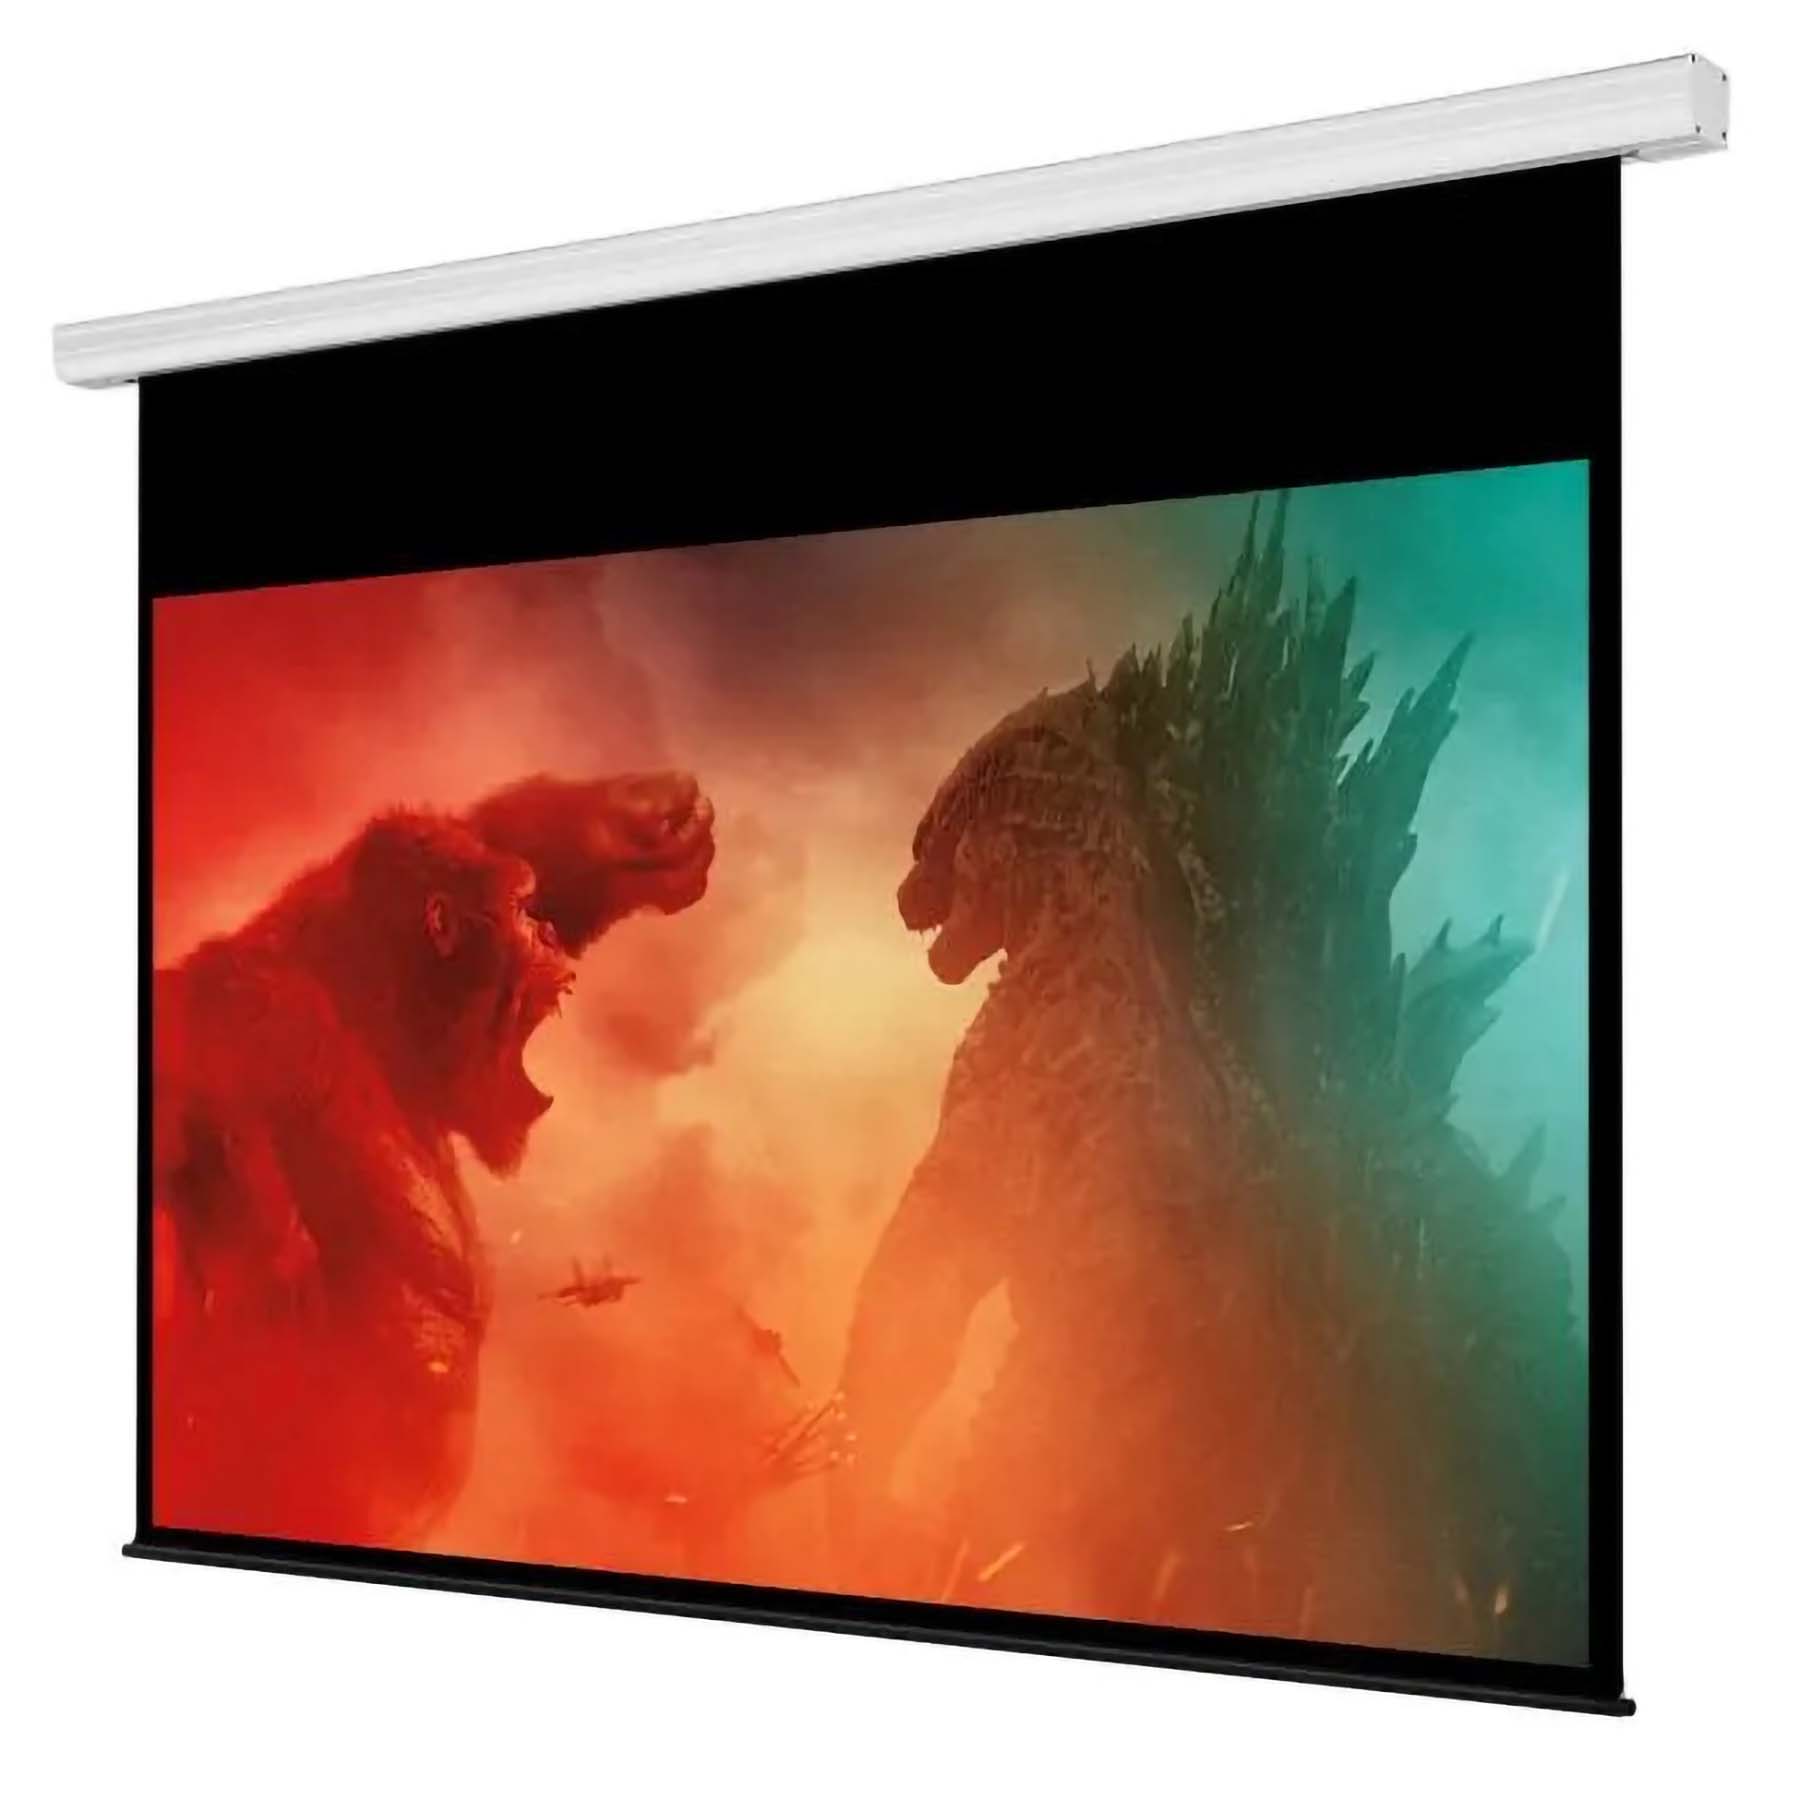 Encore Screens 16:9 CineMotion Pro - Motorised Screen with RF & Wall Control